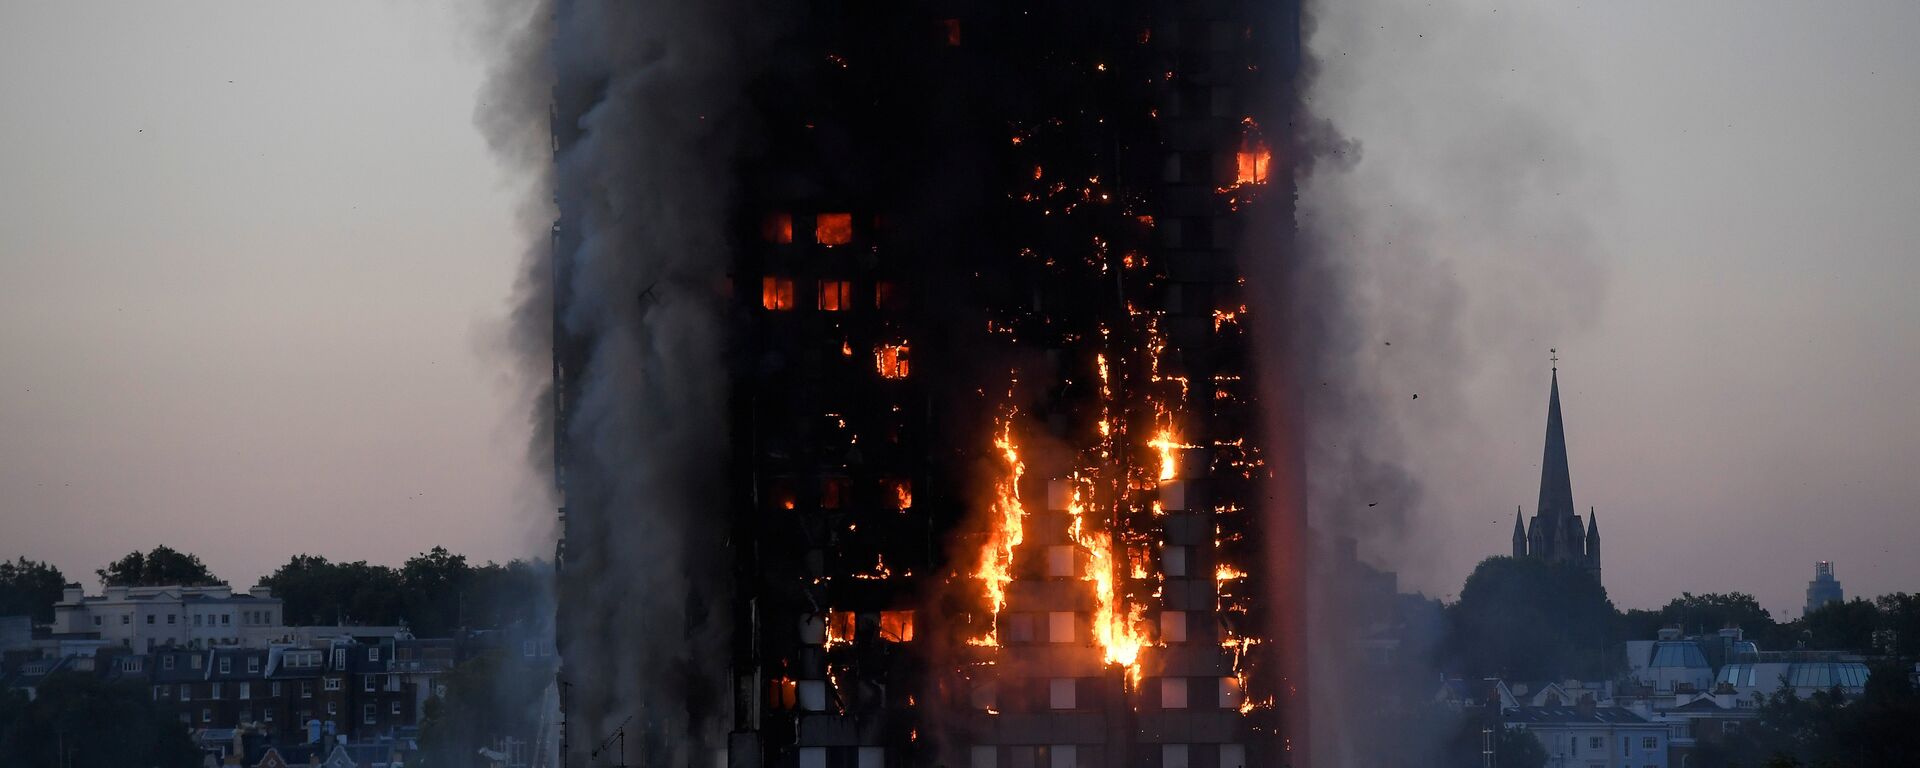 Flames and smoke billow as firefighters deal with a serious fire in a tower block at Latimer Road in West London, Britain June 14, 2017 - Sputnik International, 1920, 14.06.2019